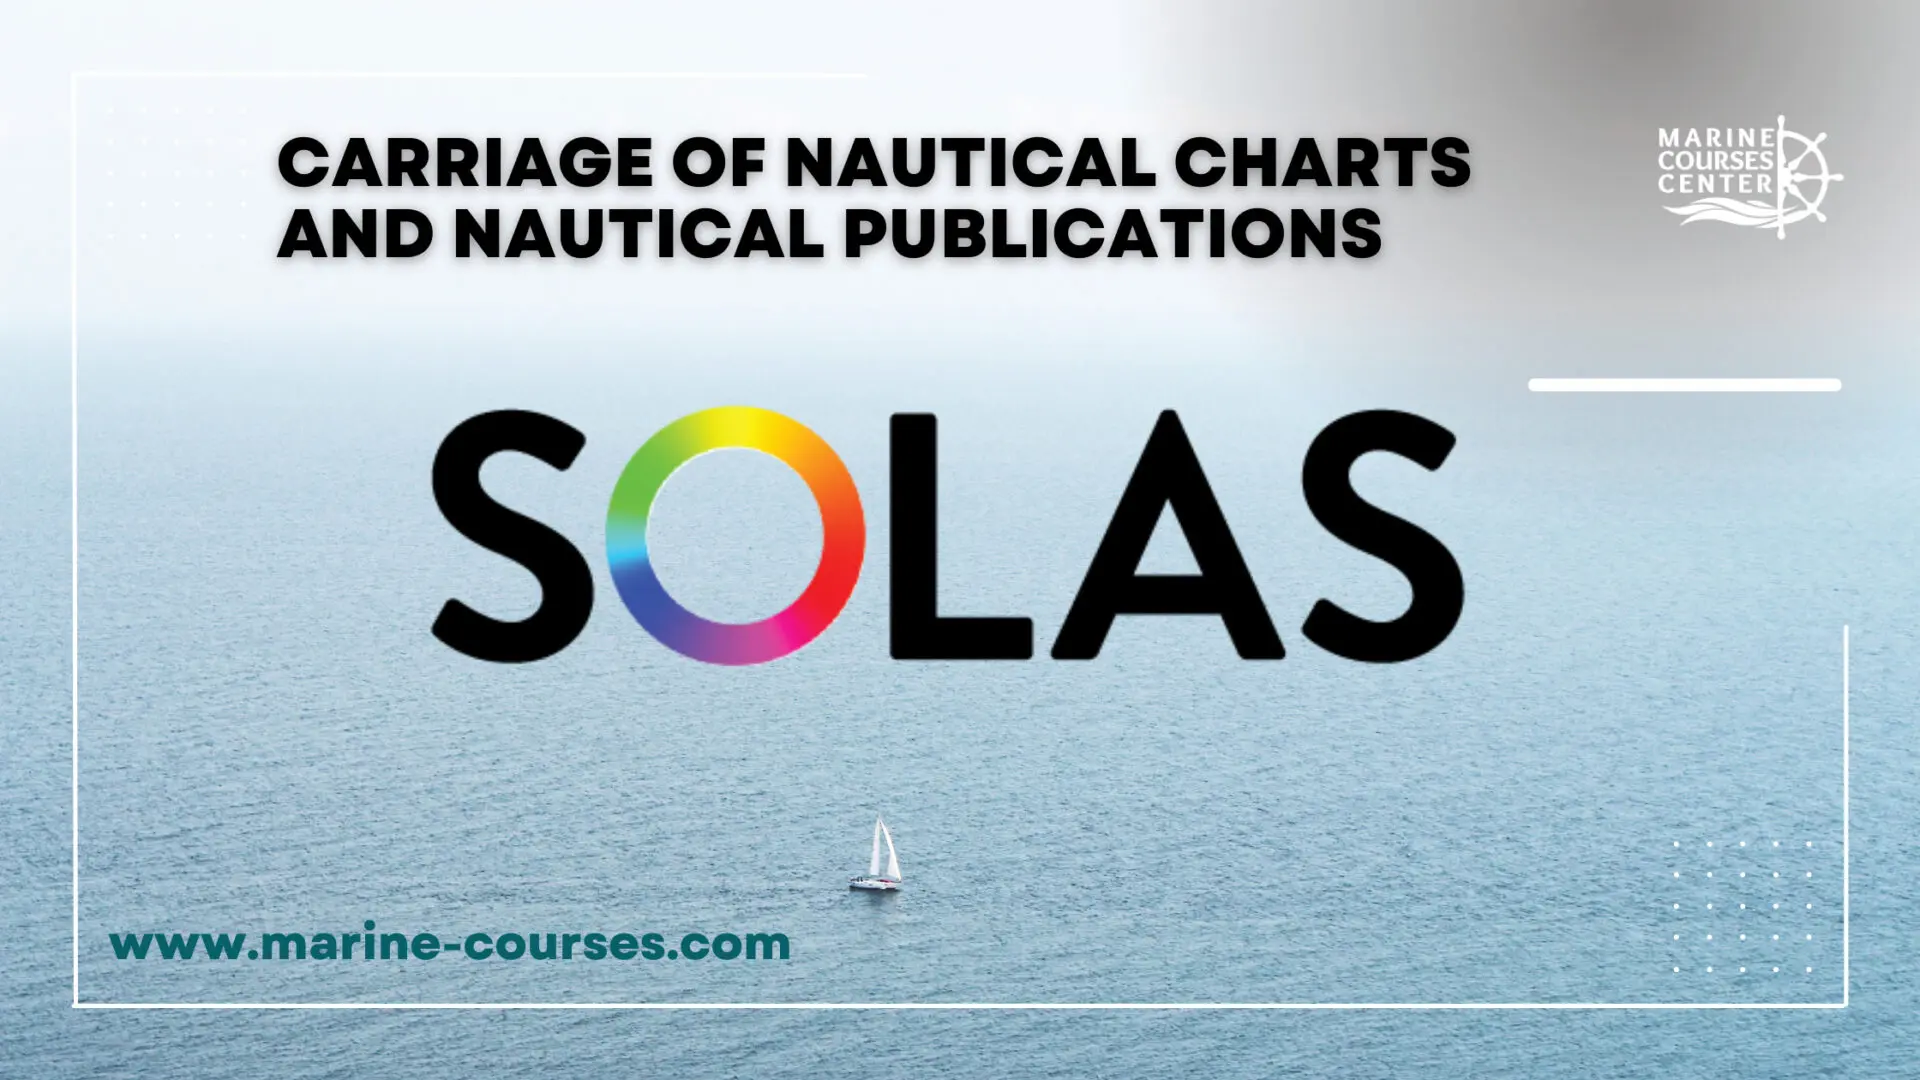 Carriage of Nautical Charts and